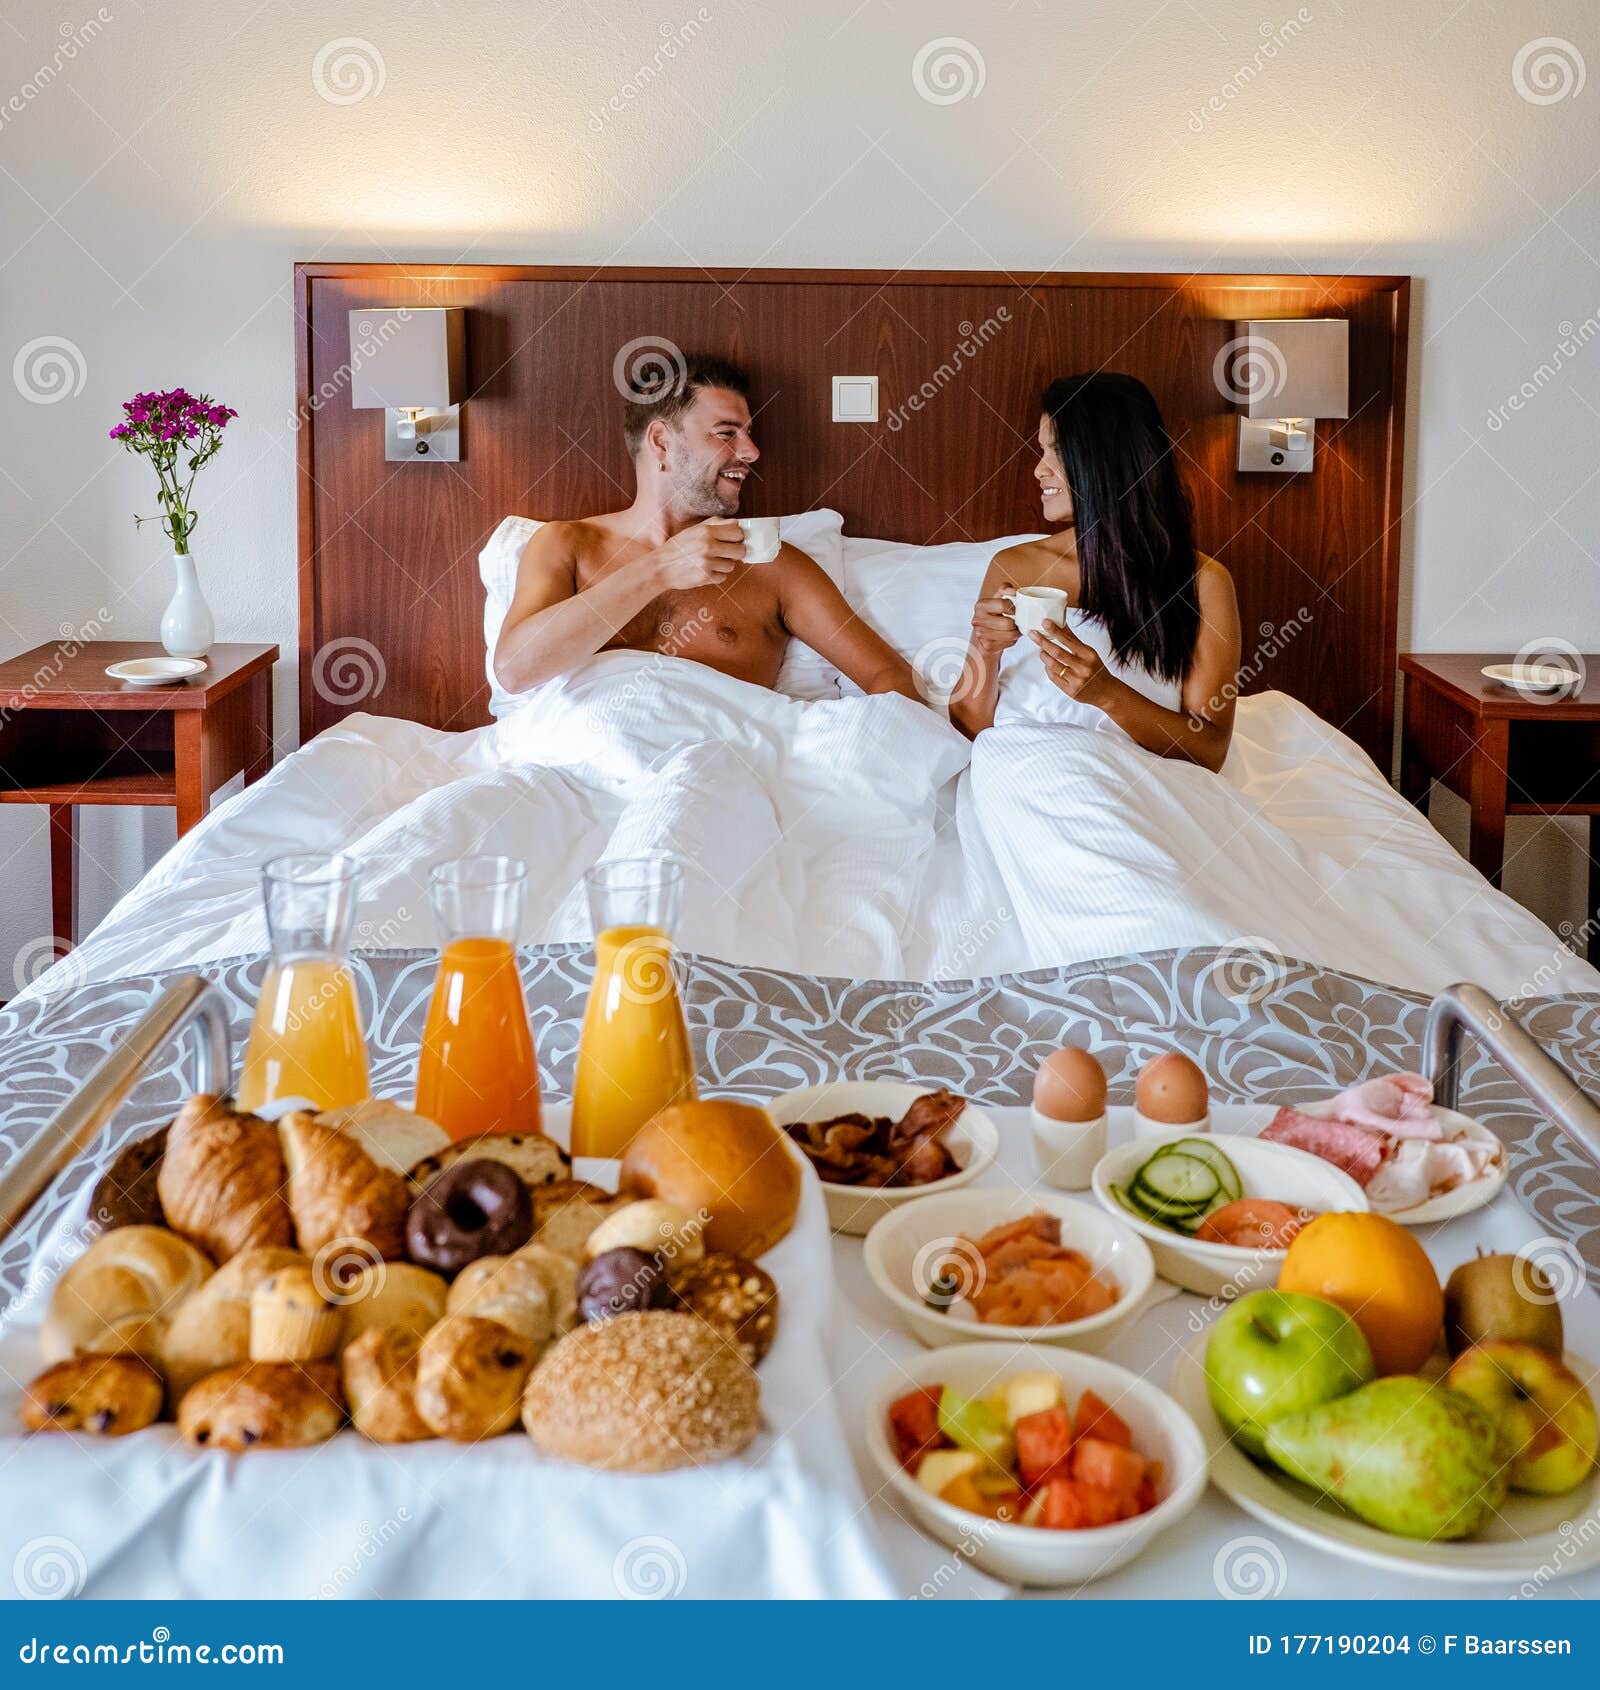 All 101+ Images romantic breakfast in bed pictures Sharp